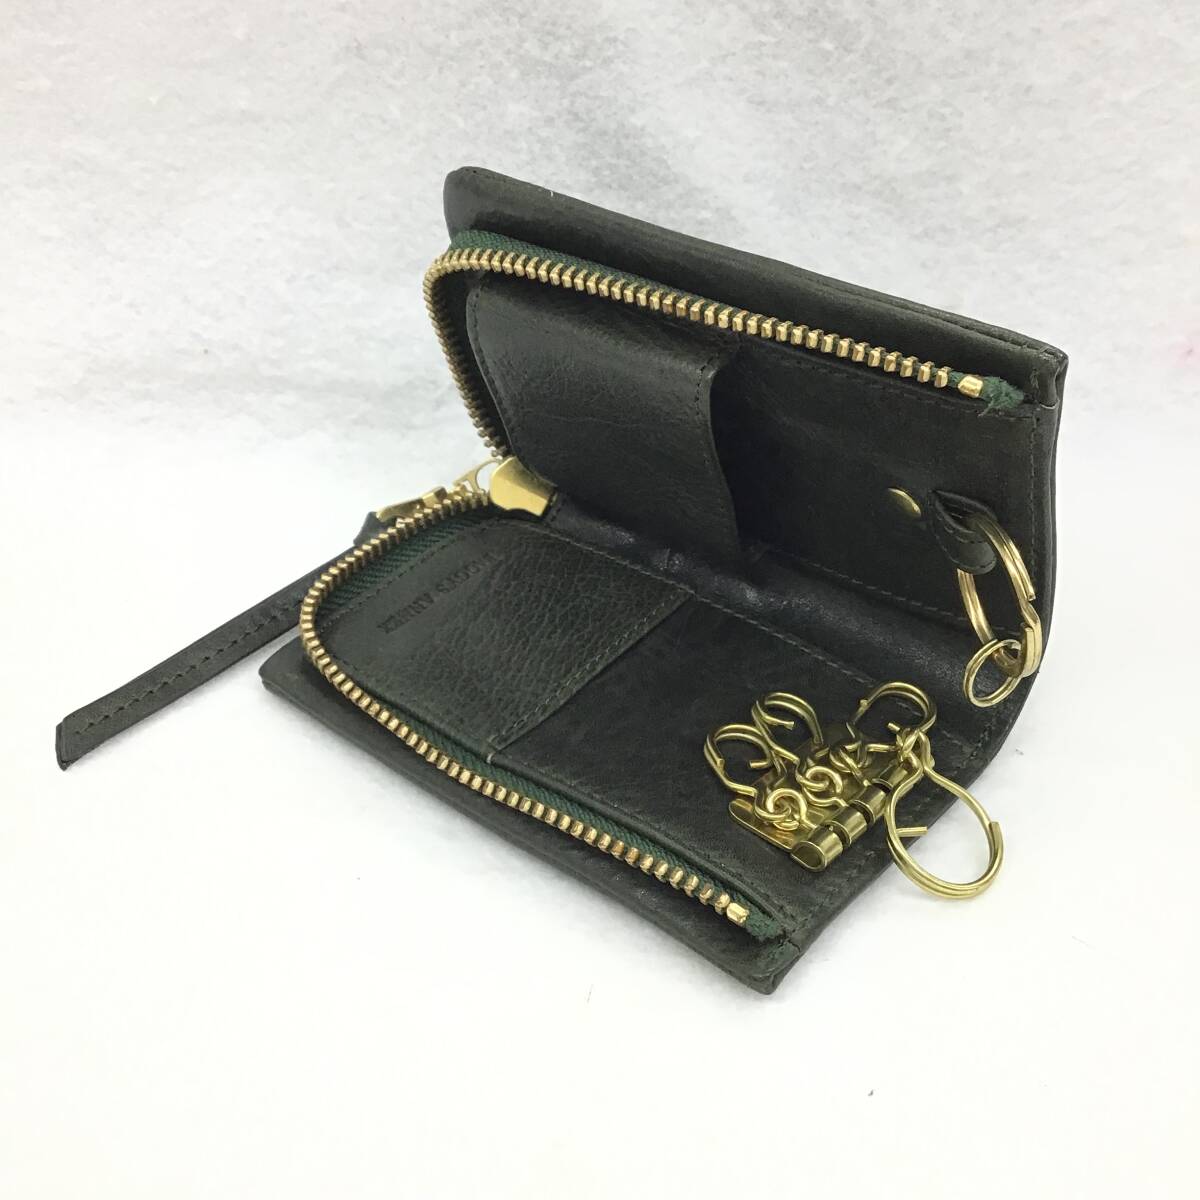  unused goods BAGGY PORT buggy port key case leather olive box attaching 